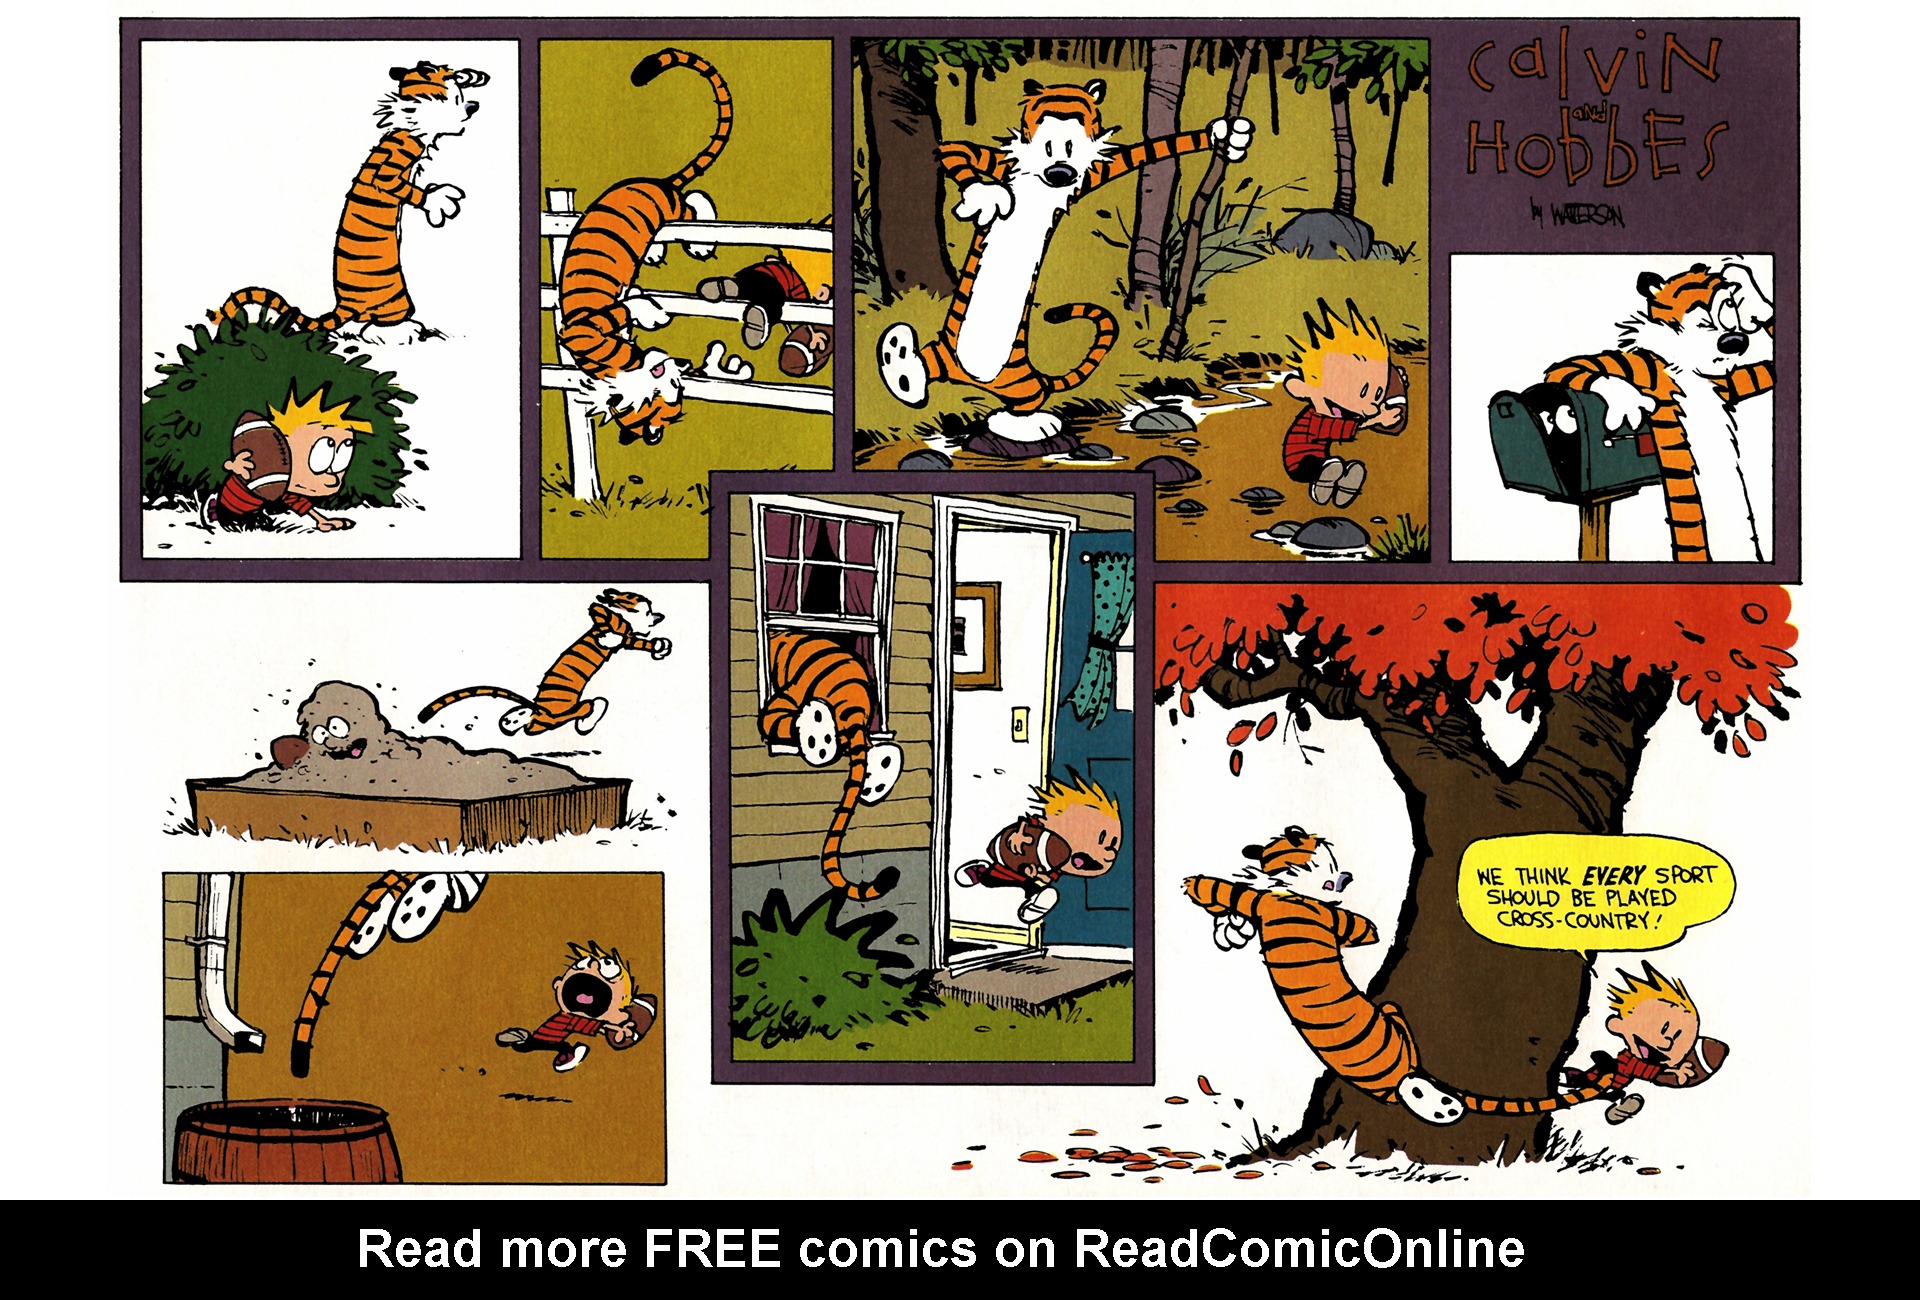 Read online Calvin and Hobbes comic - Issue #8 - 168.